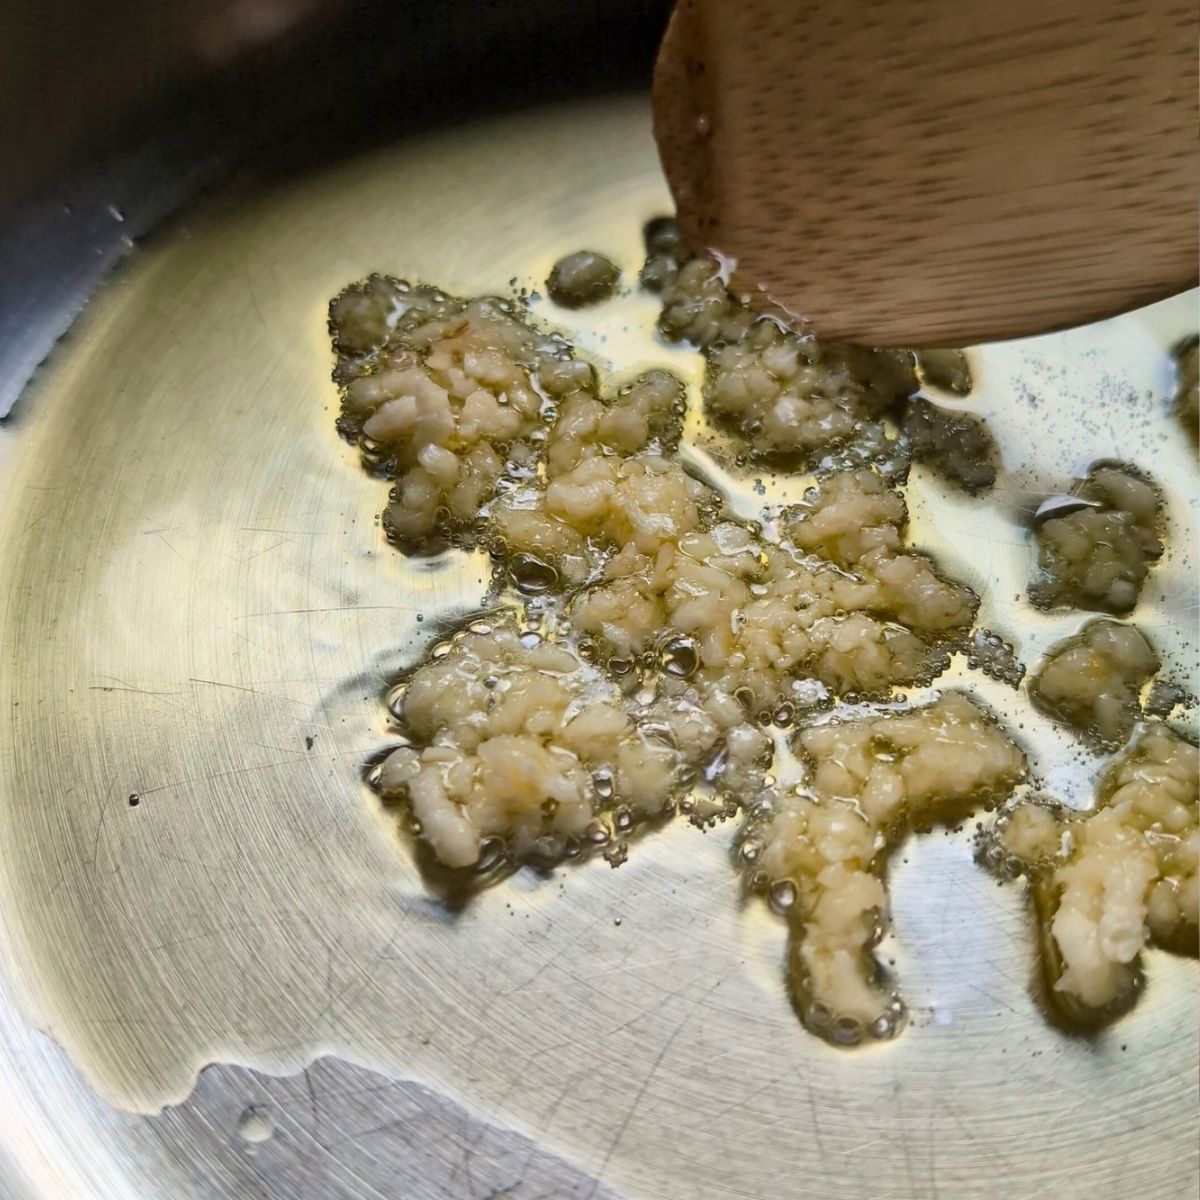 garlic and olive oil being sauteed in the pan being stirred by a wooden spoon.